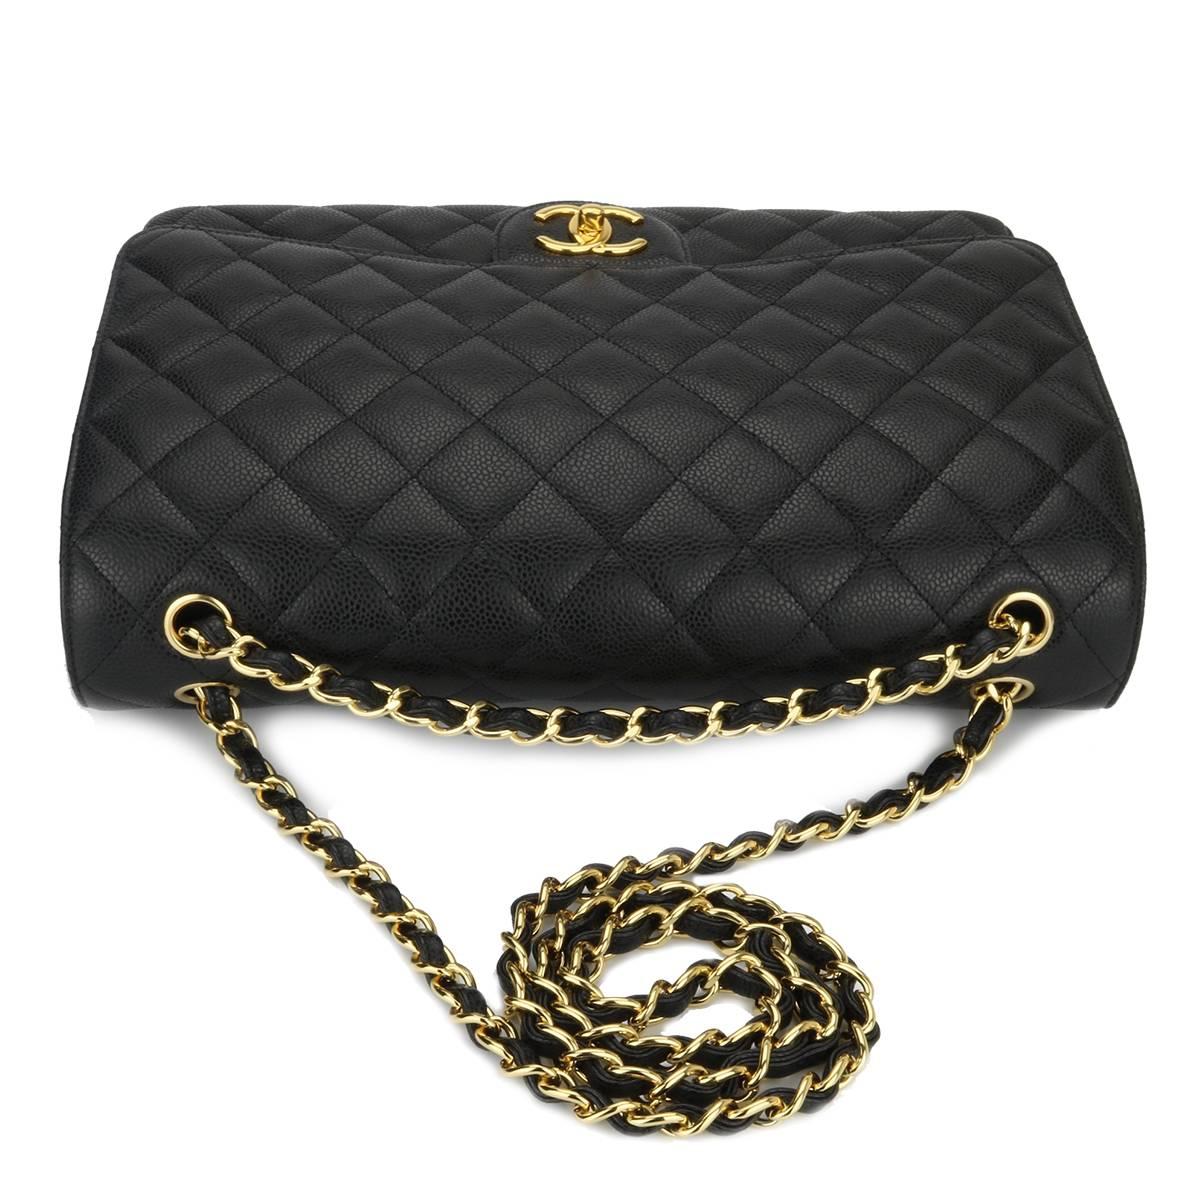 CHANEL Black Caviar Maxi Double Flap with Gold Hardware 2016 2